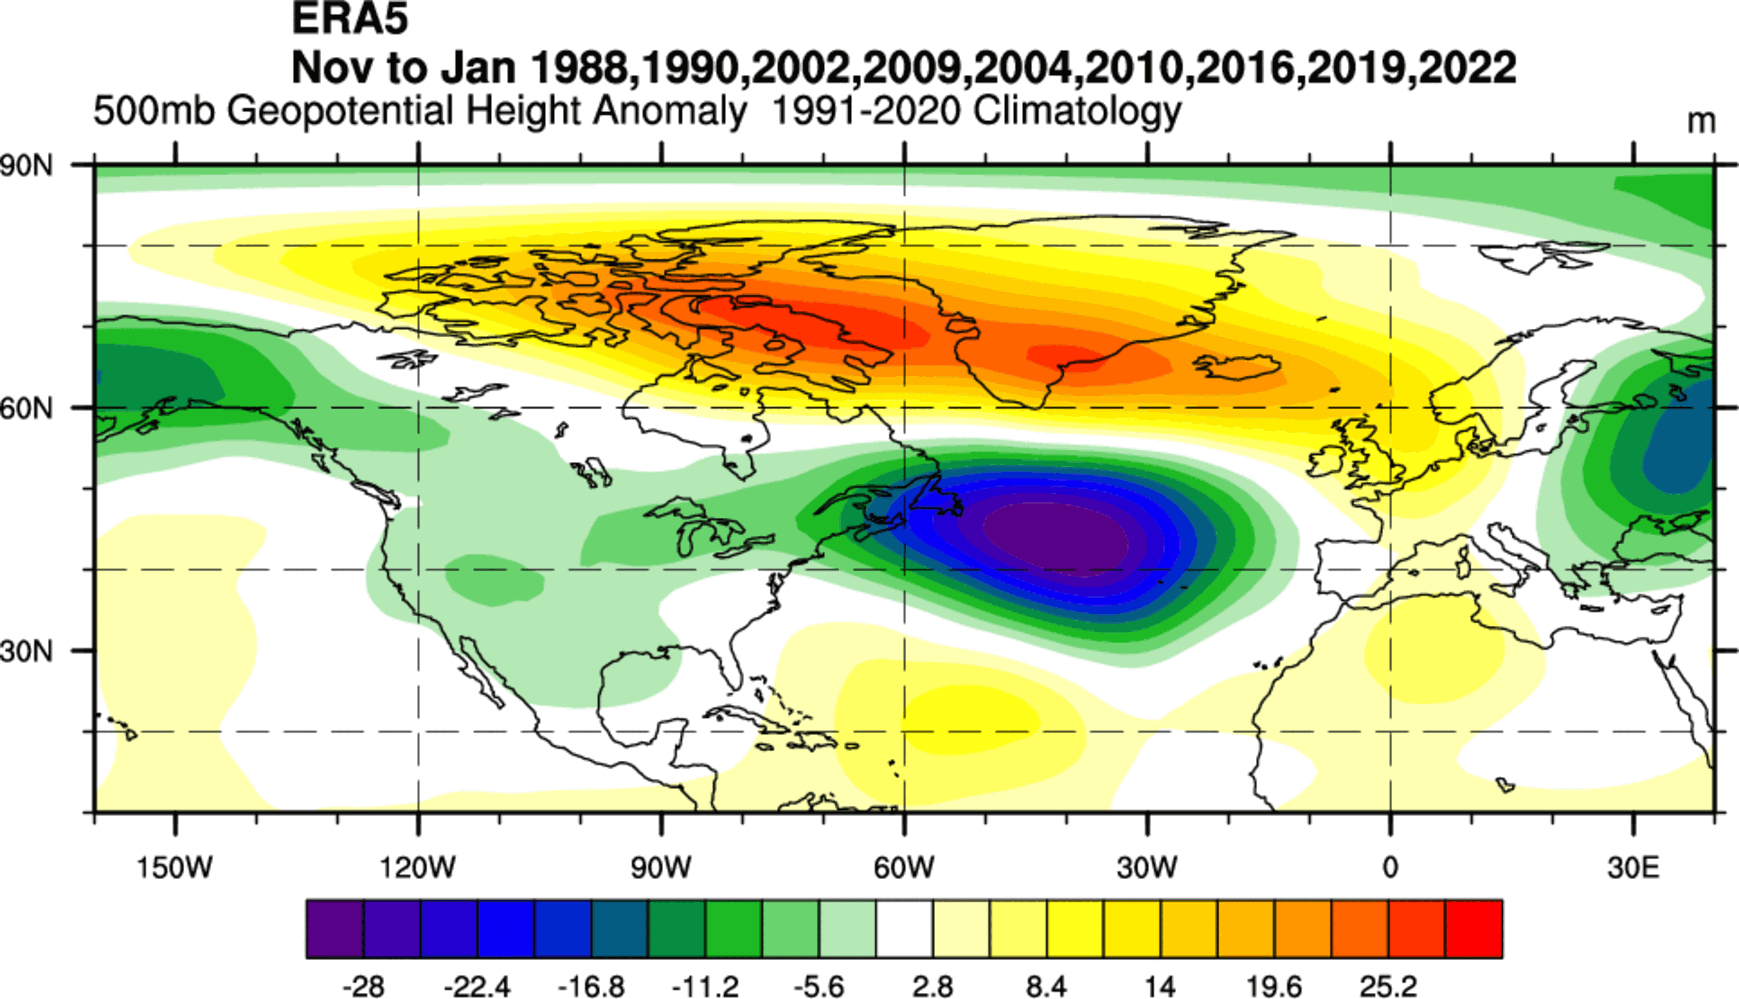 stratospheric-polar-vortex-cooling-anomaly-weather-winter-influence-historical-pattern-data